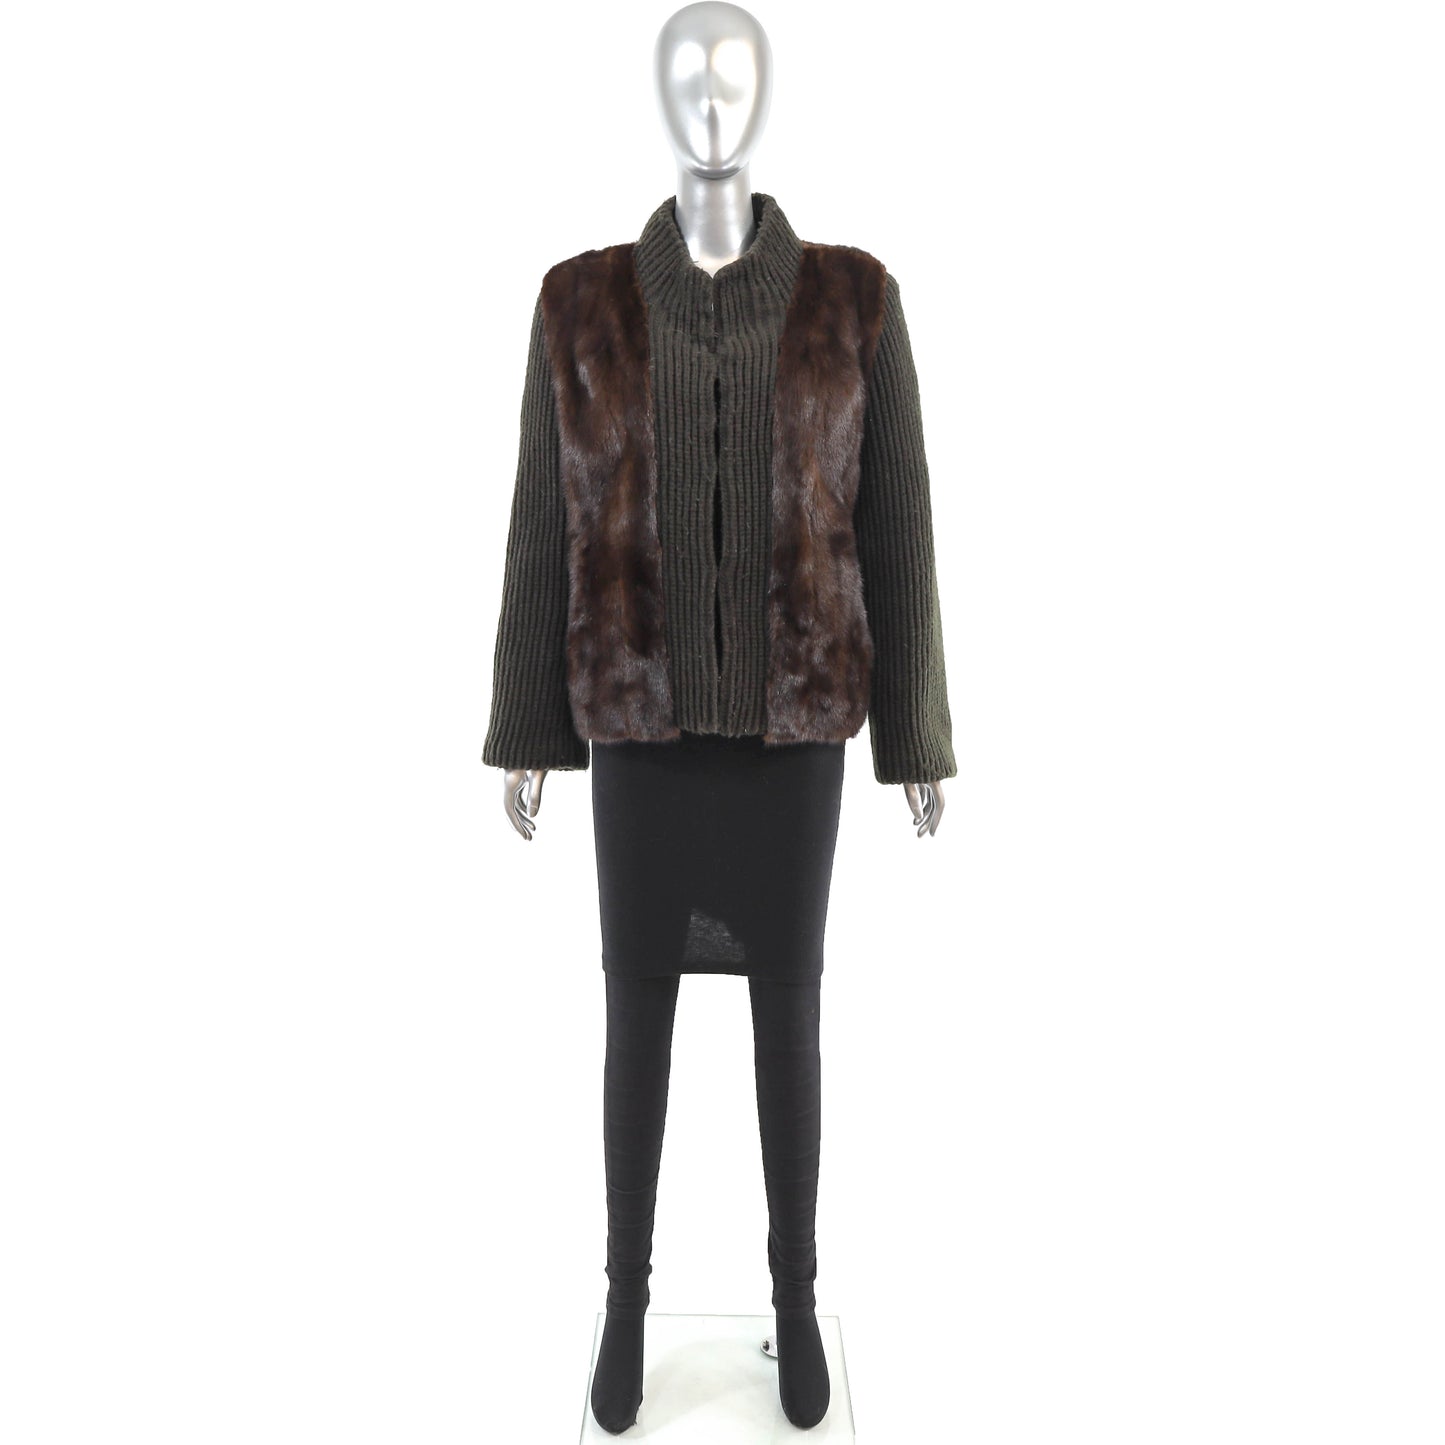 Mink Jacket with Knitted Sleeves- Size S